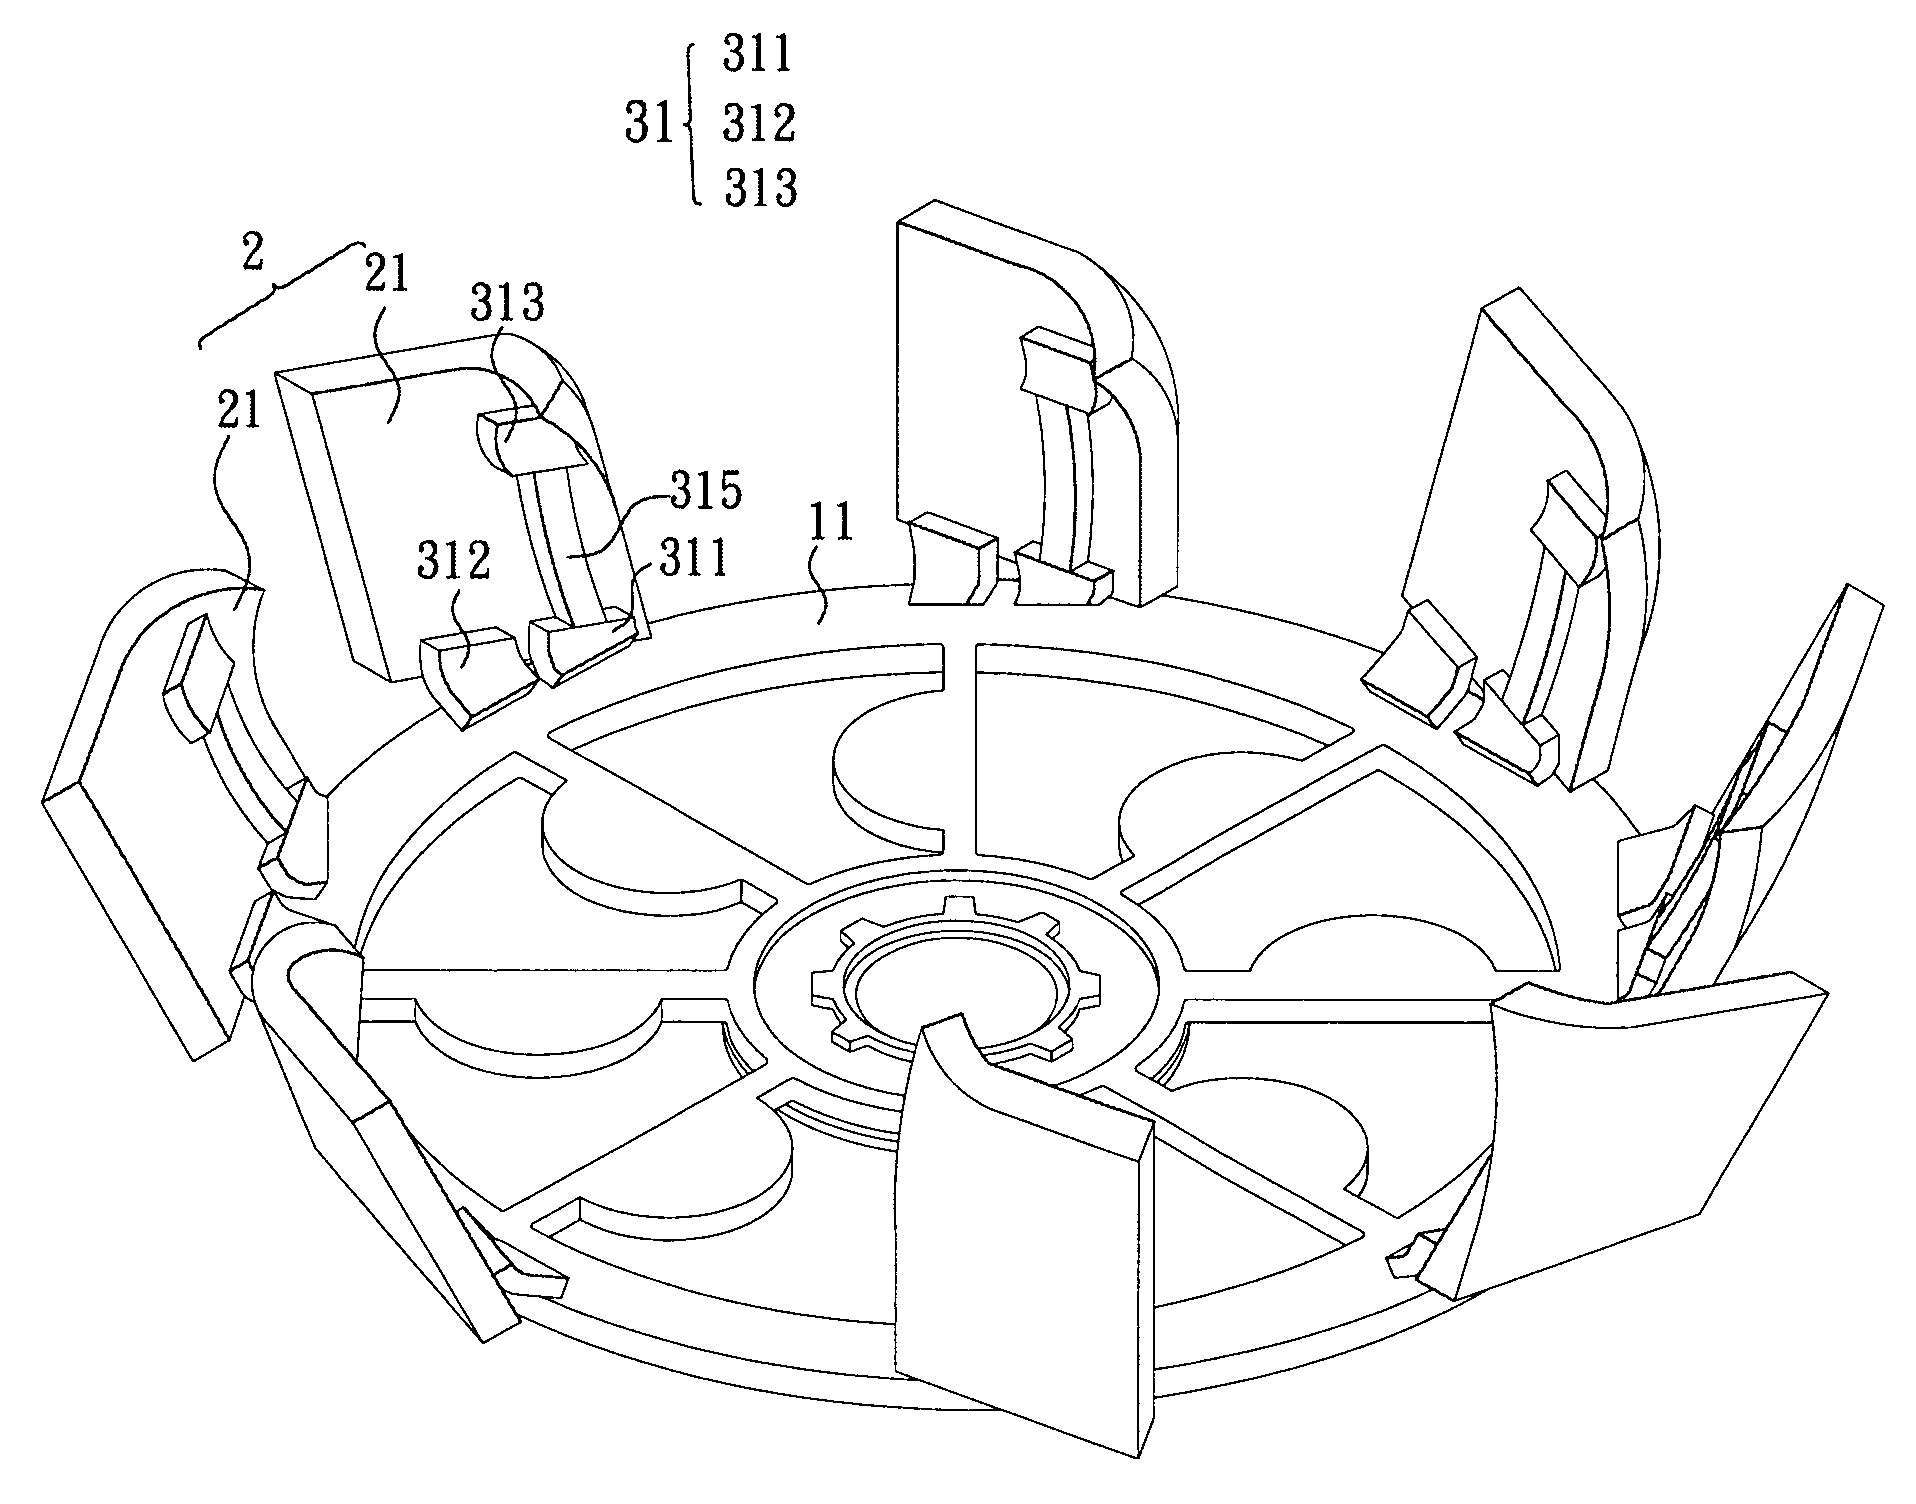 Self-assembly micro blade